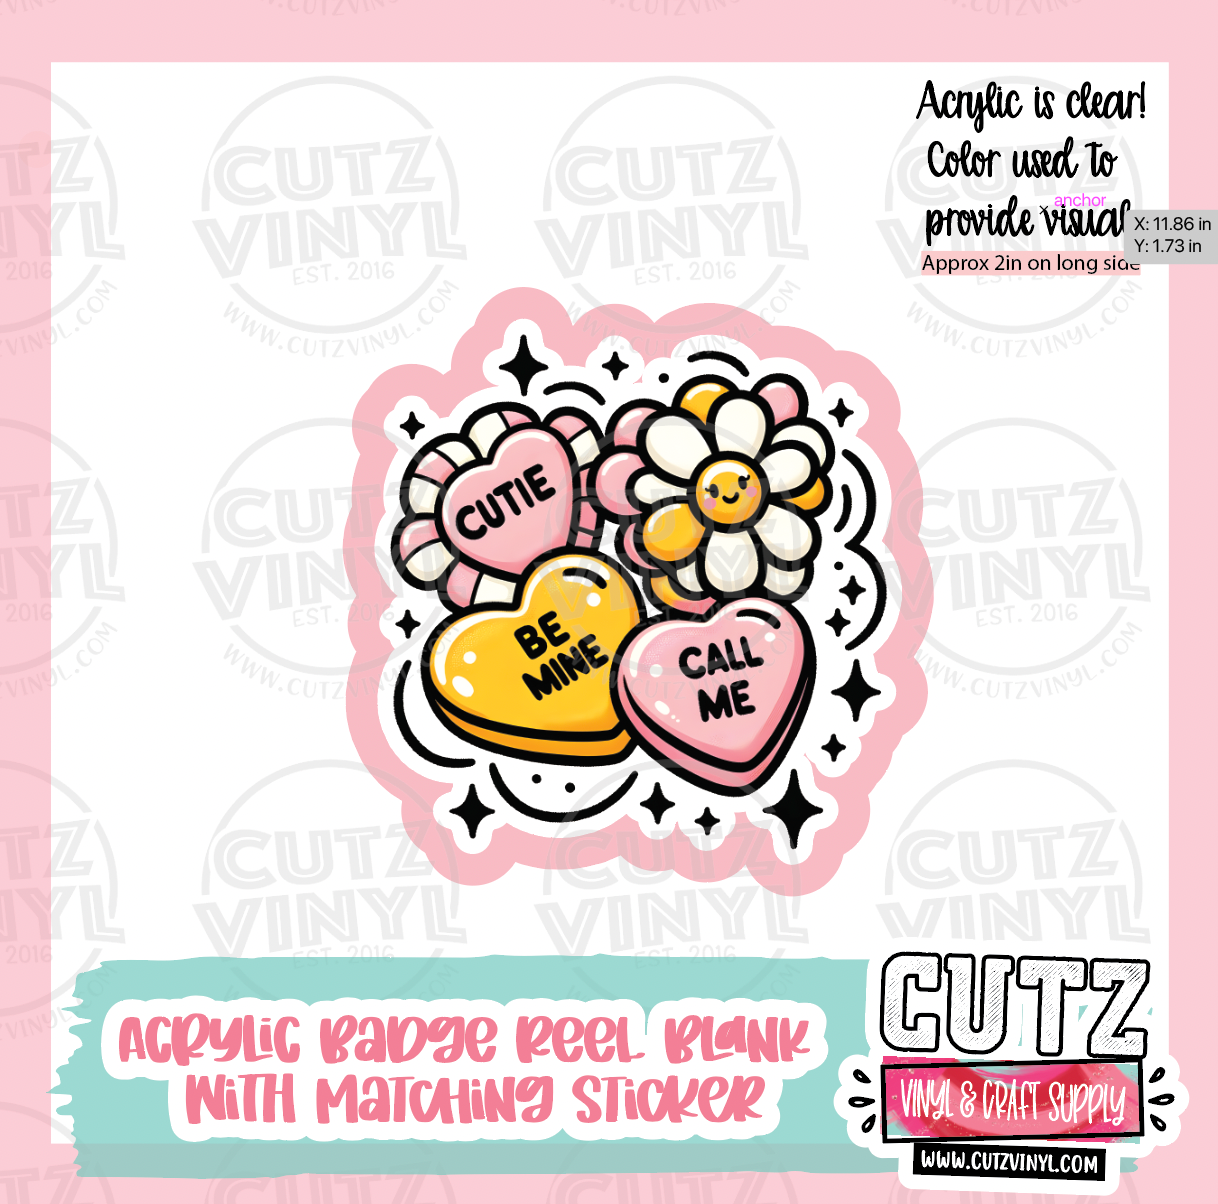 Call Me Heart - Acrylic Badge Reel Blank and Matching Sticker